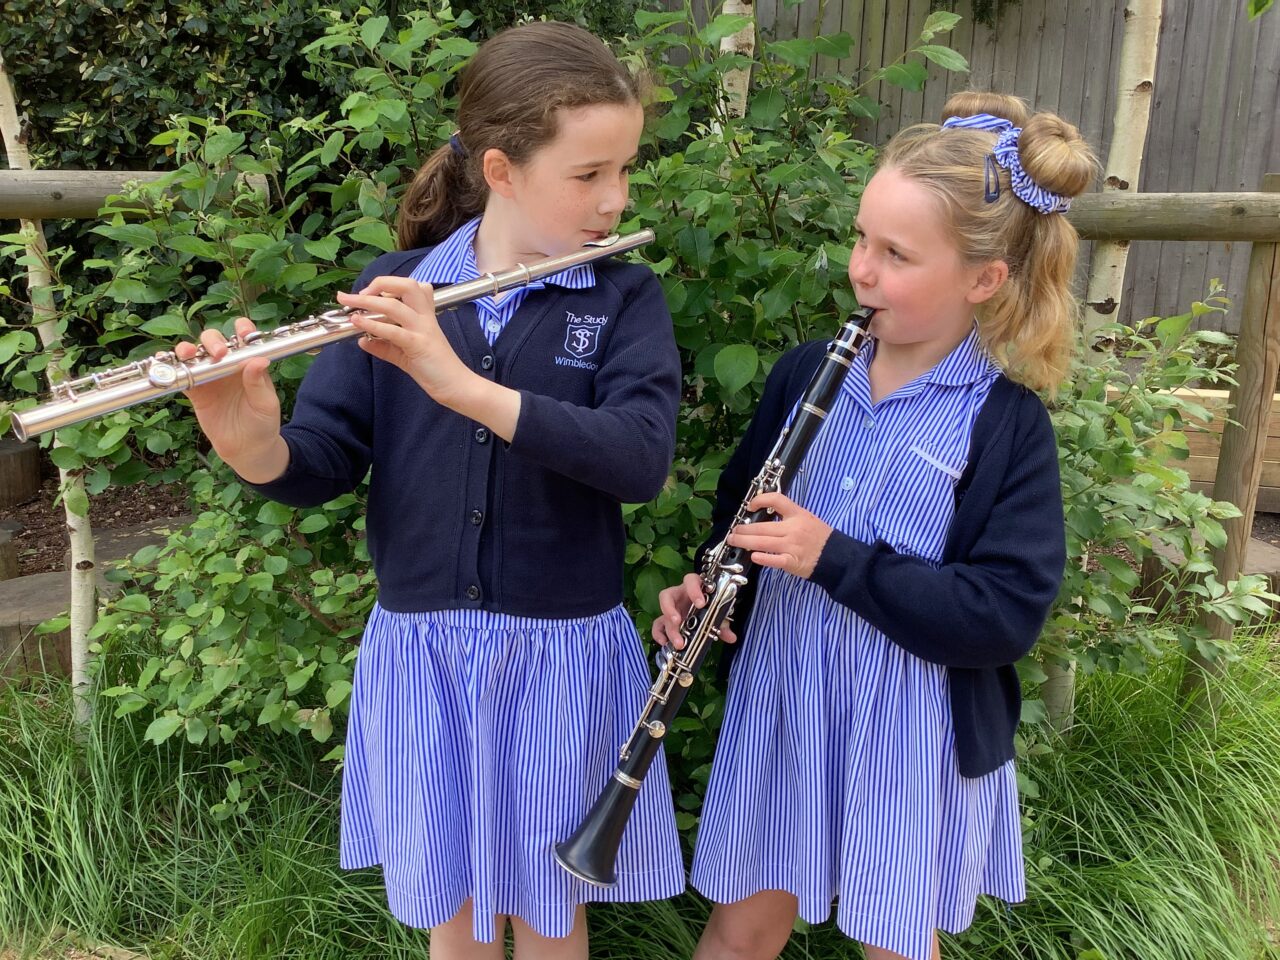 Study girls playing wind instruments